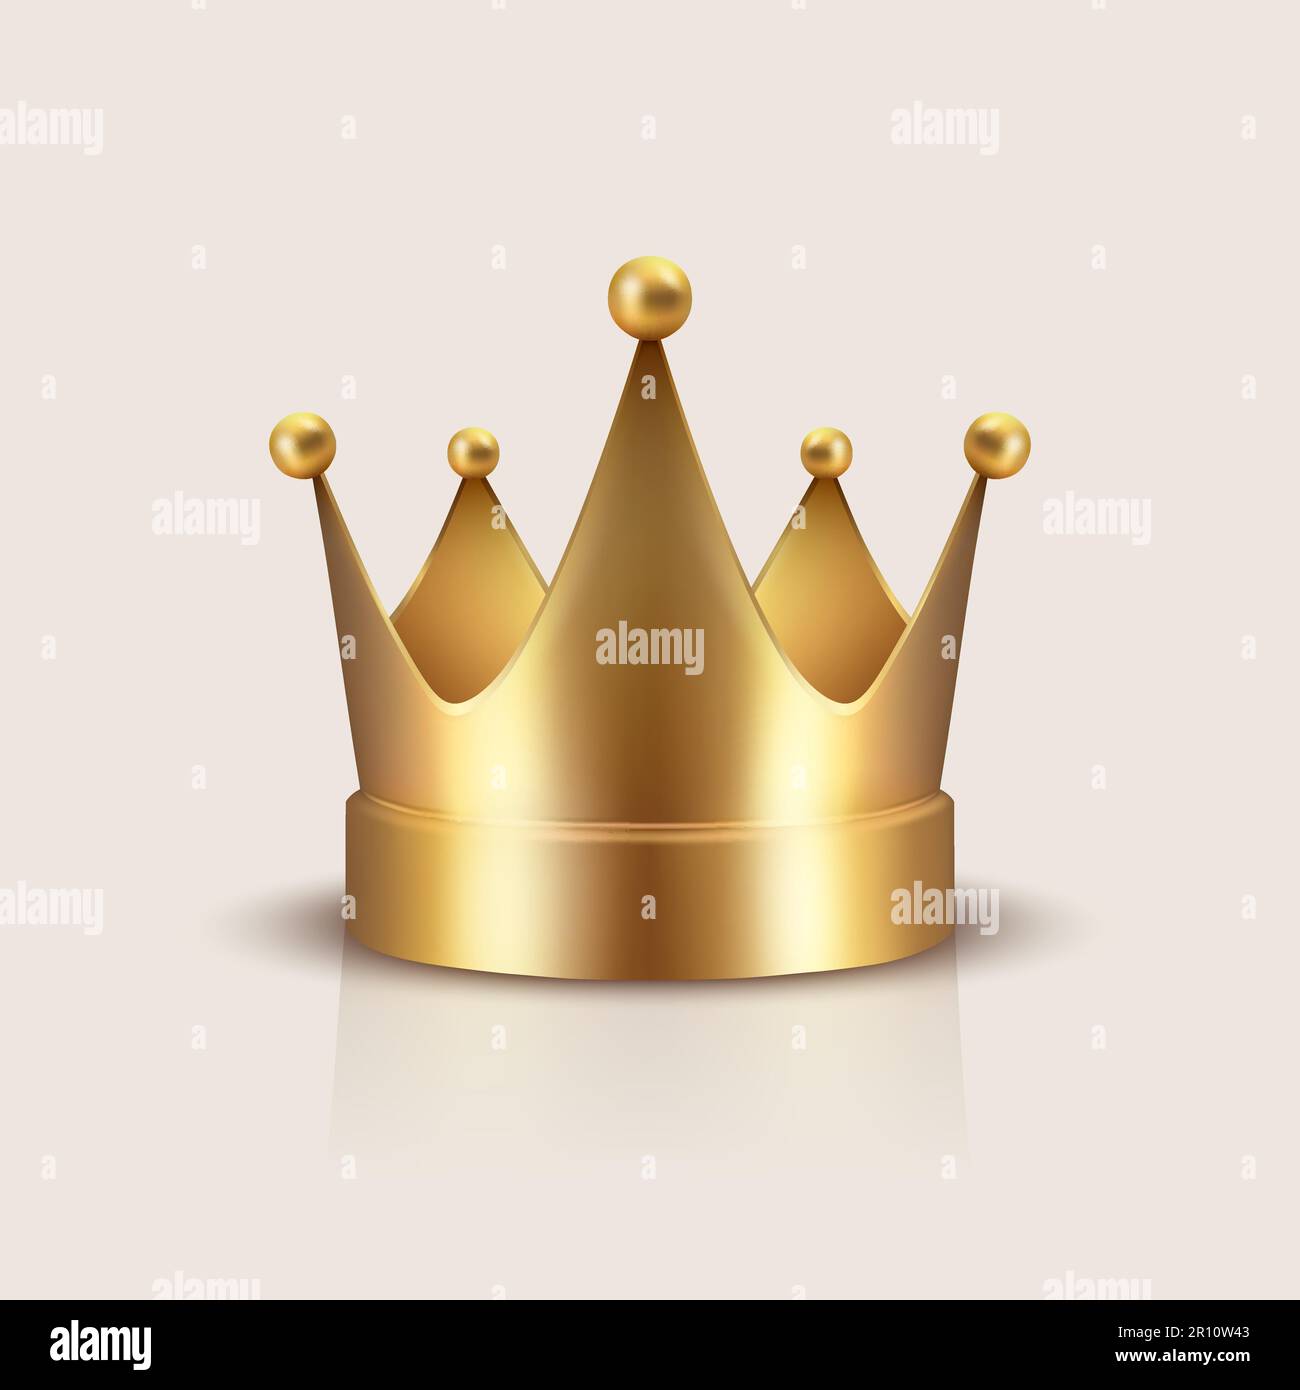 Vector 3d Realistic Golden Crown Icon Closeup Isolated. Yellow Metallic Crown Design Template. Gold Royal King Crown. Symbol of Imperial Power. Luxury Stock Vector